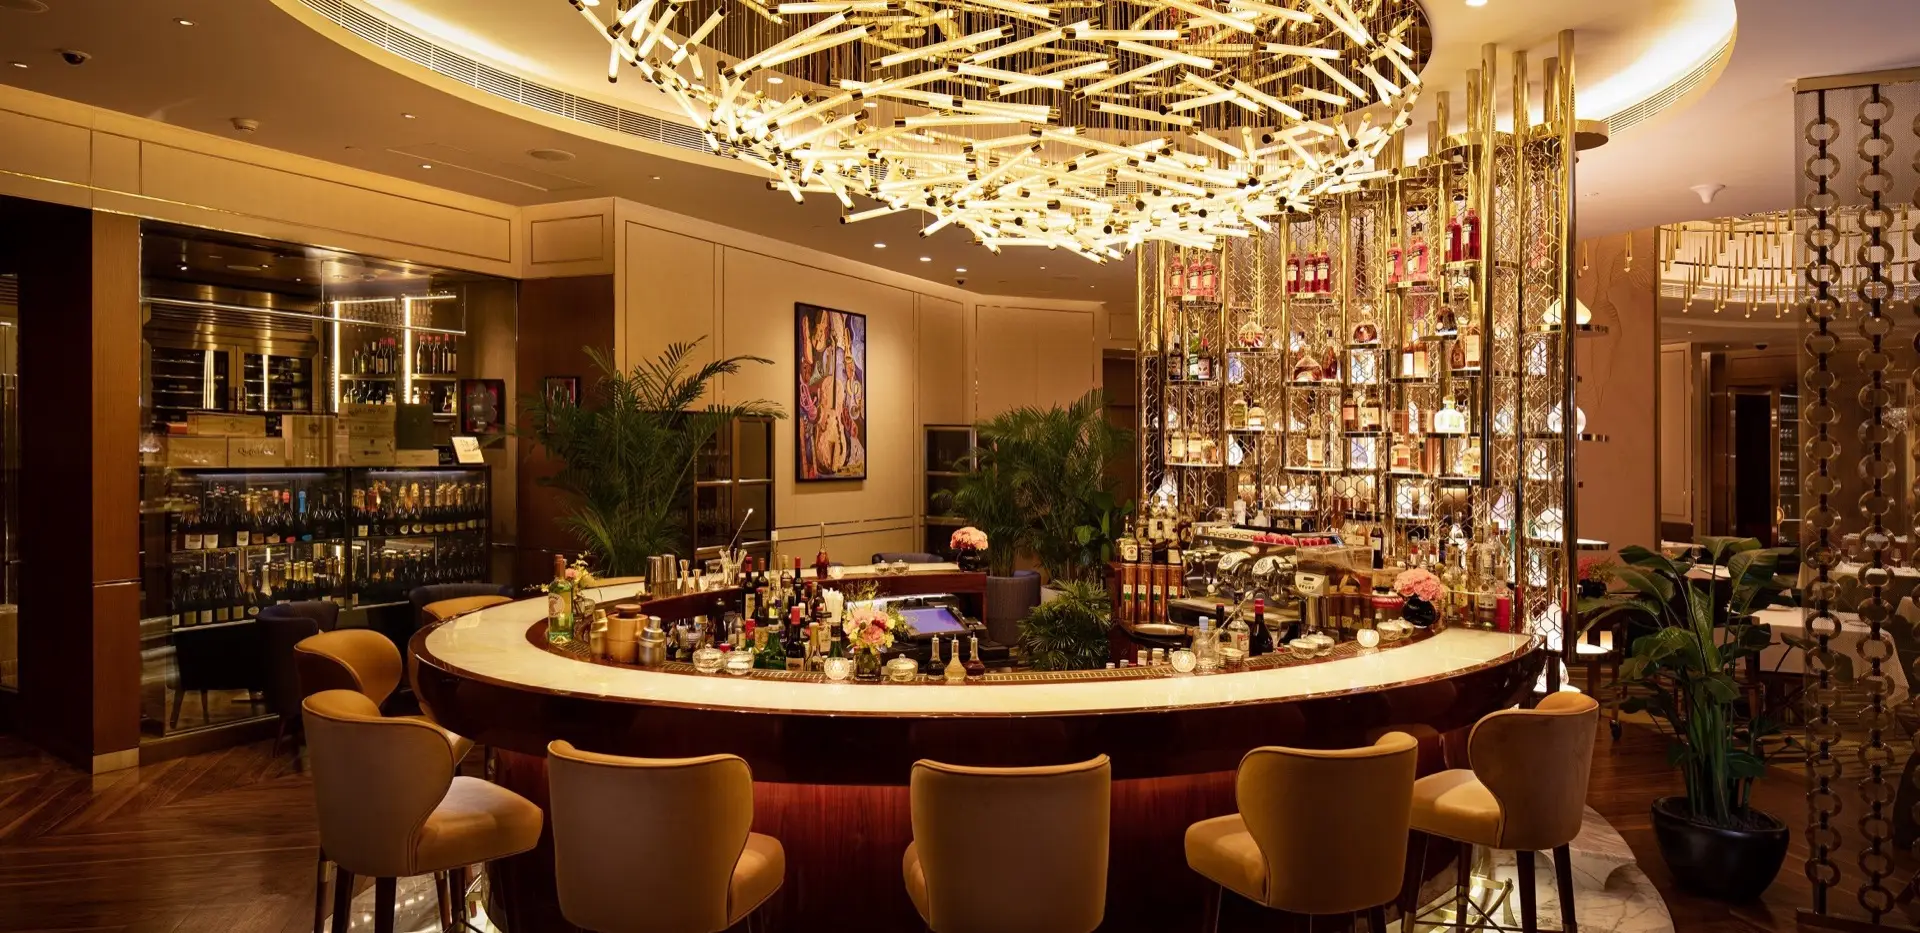 8½ OTTO E MEZZO BOMBANA AT GALAXY MACAU WELCOMES ONE OF 'THE WORLD 50 BEST BARS' 1930 COCKTAIL BAR FOR A CAPTIVATING CROSSOVER